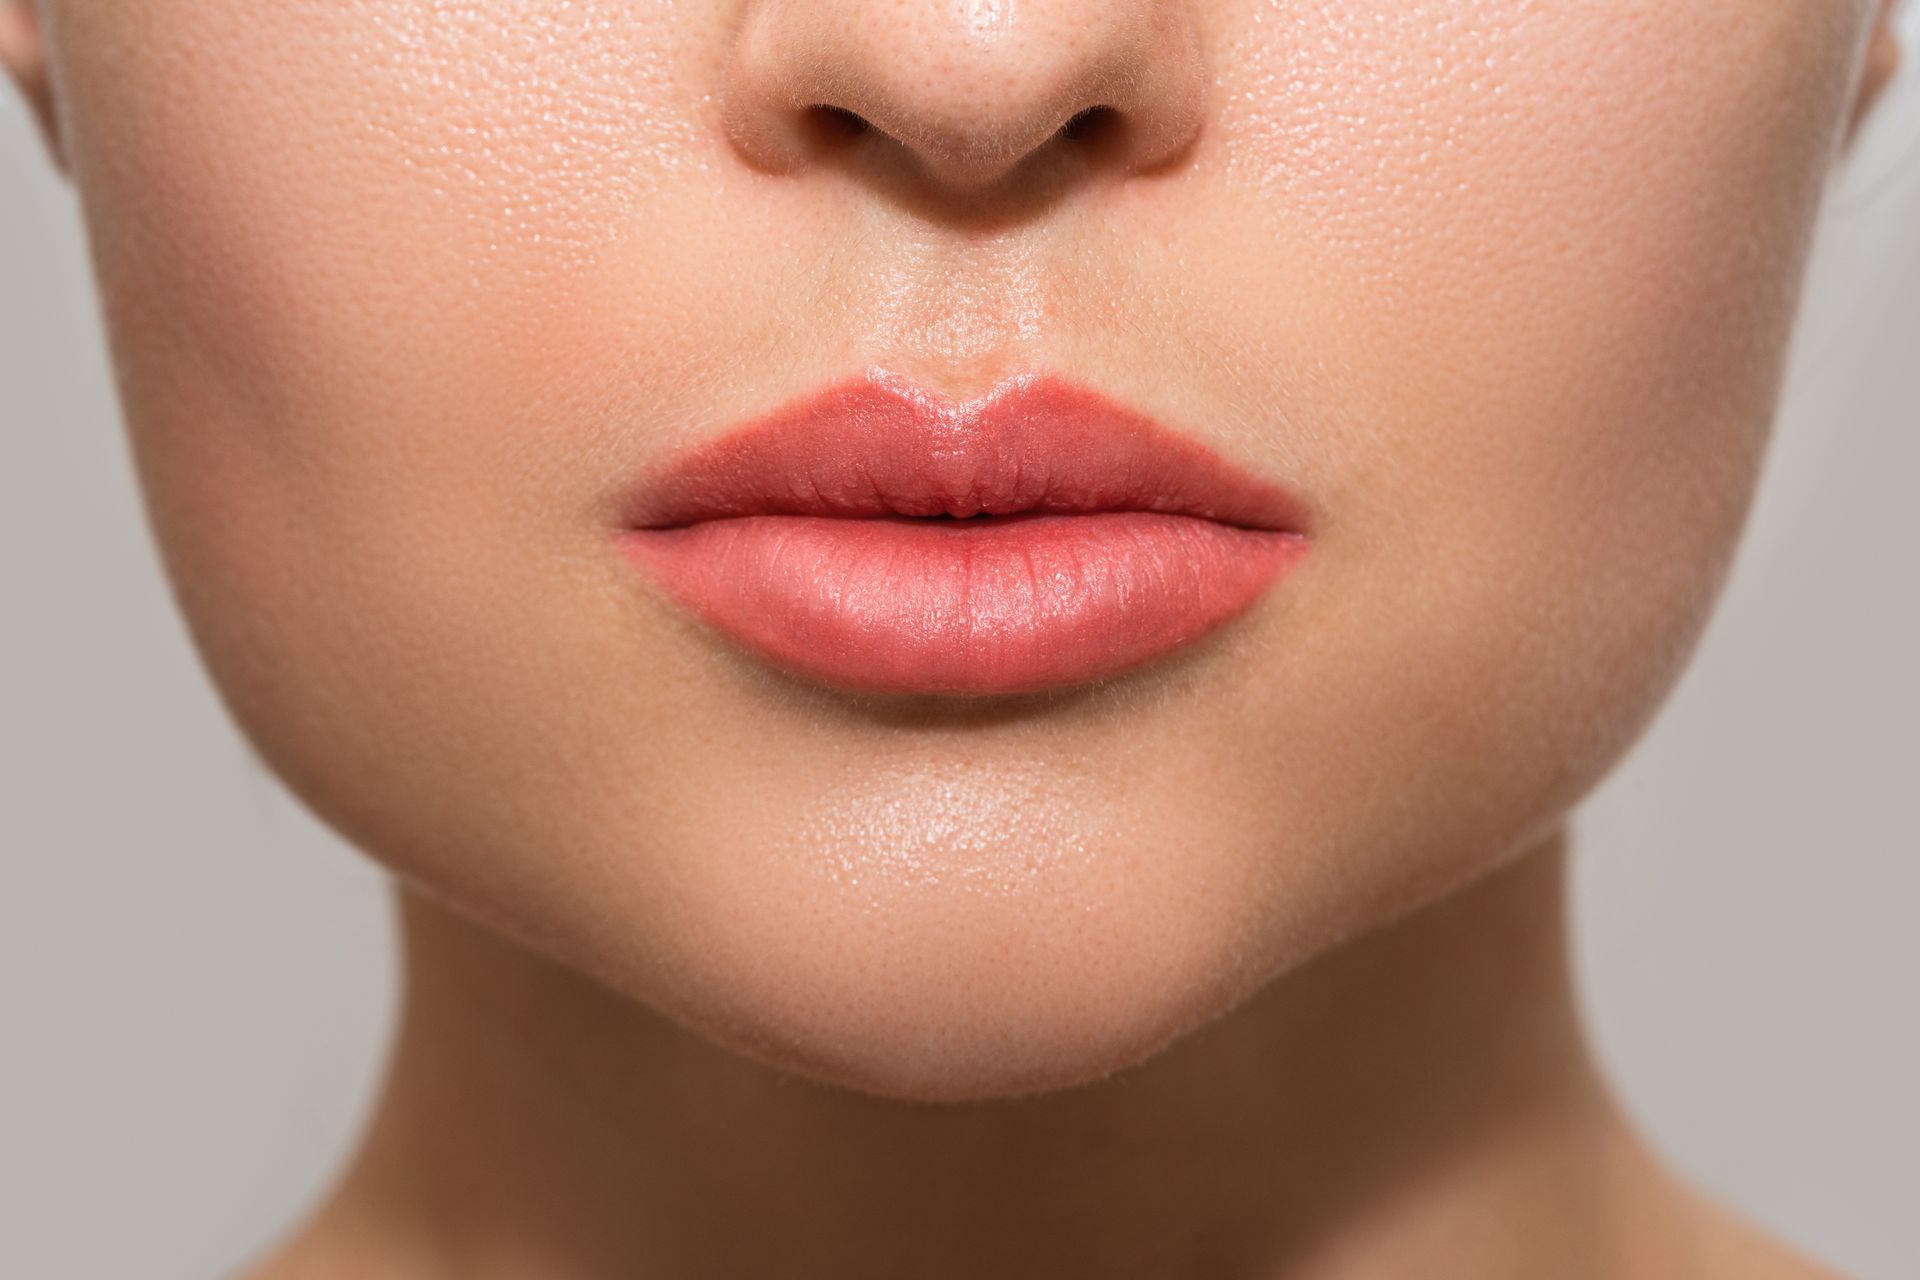 a close up of a woman 's face with red lips